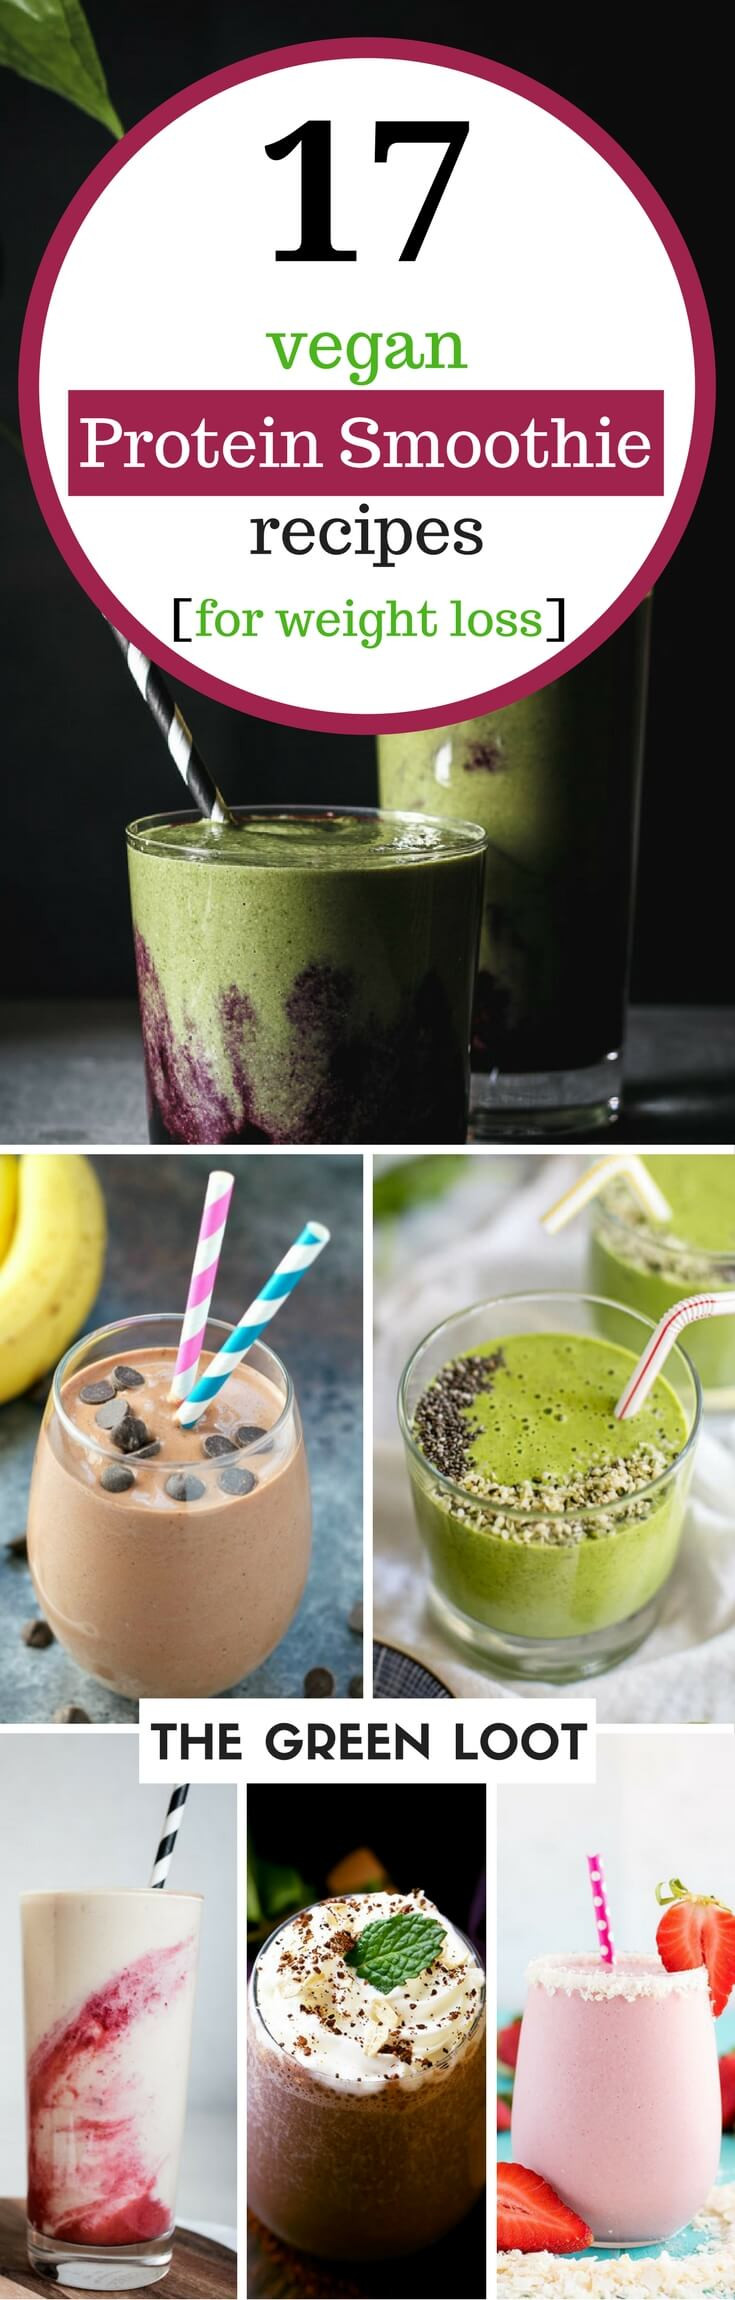 Protein Smoothies For Weight Loss
 17 Tasty Vegan Protein Smoothie Recipes for Weight Loss